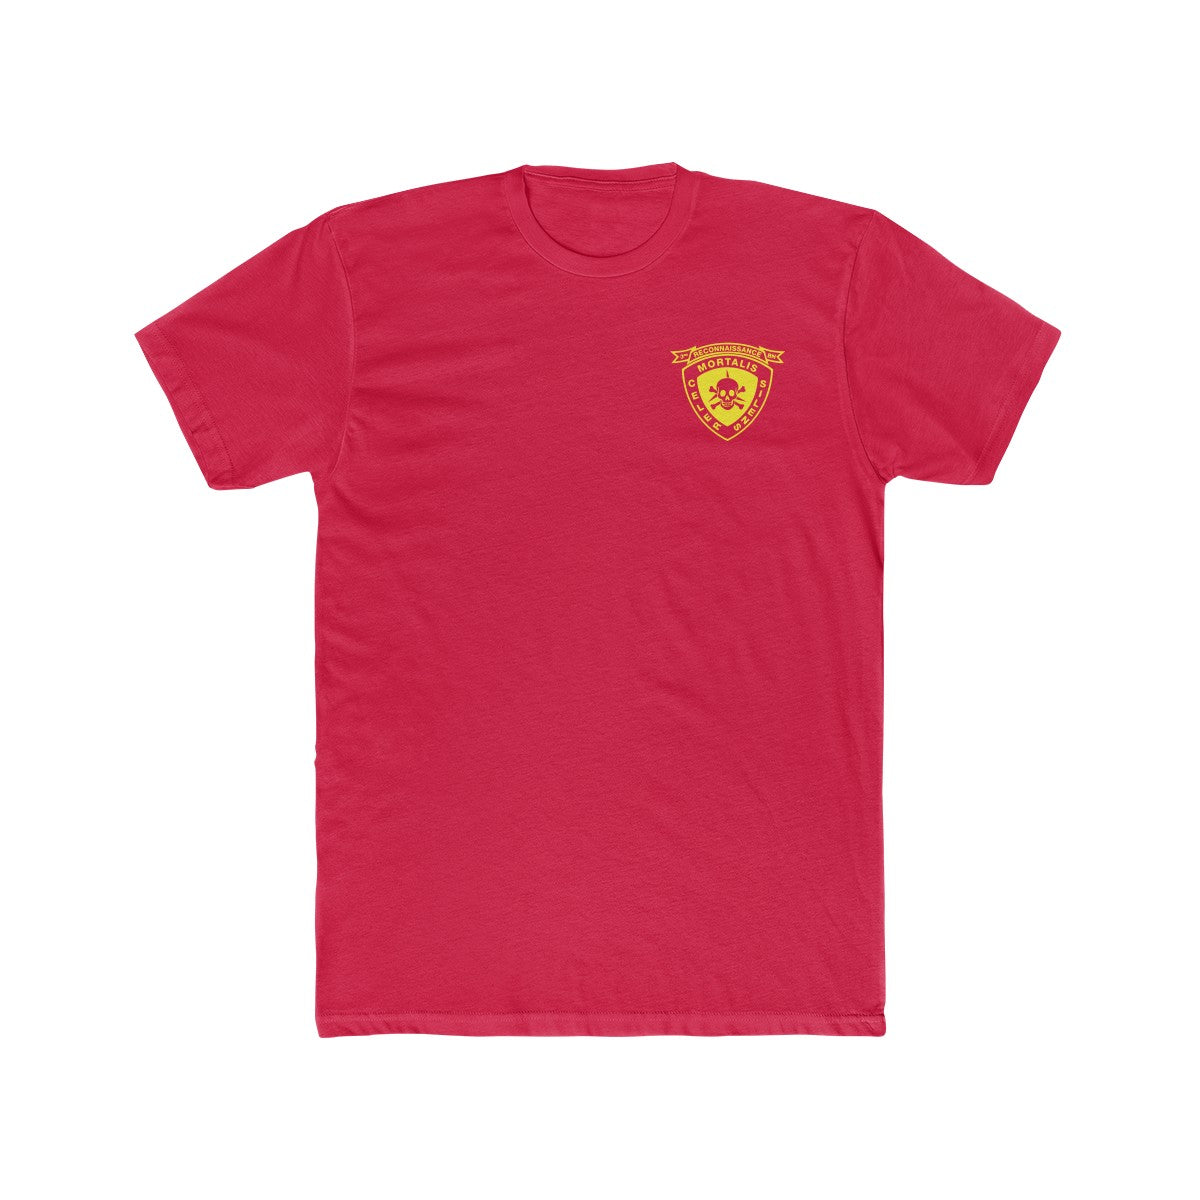 Red 3rd Recon Battalion Tee